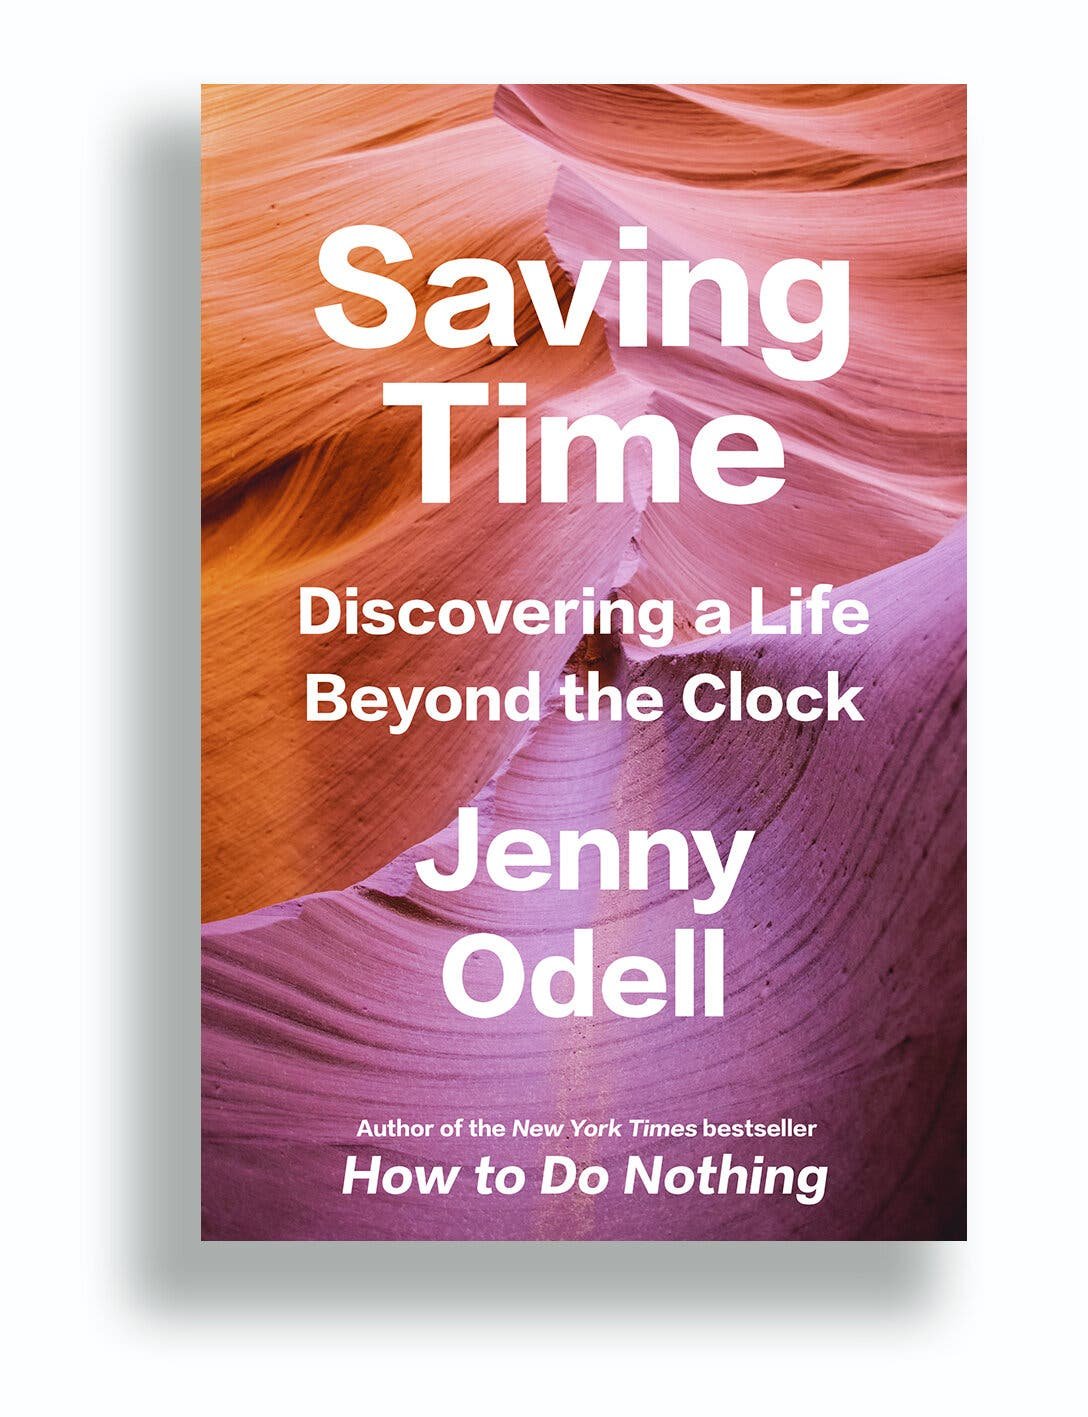 Book Review: Saving Time by Jenny Odell